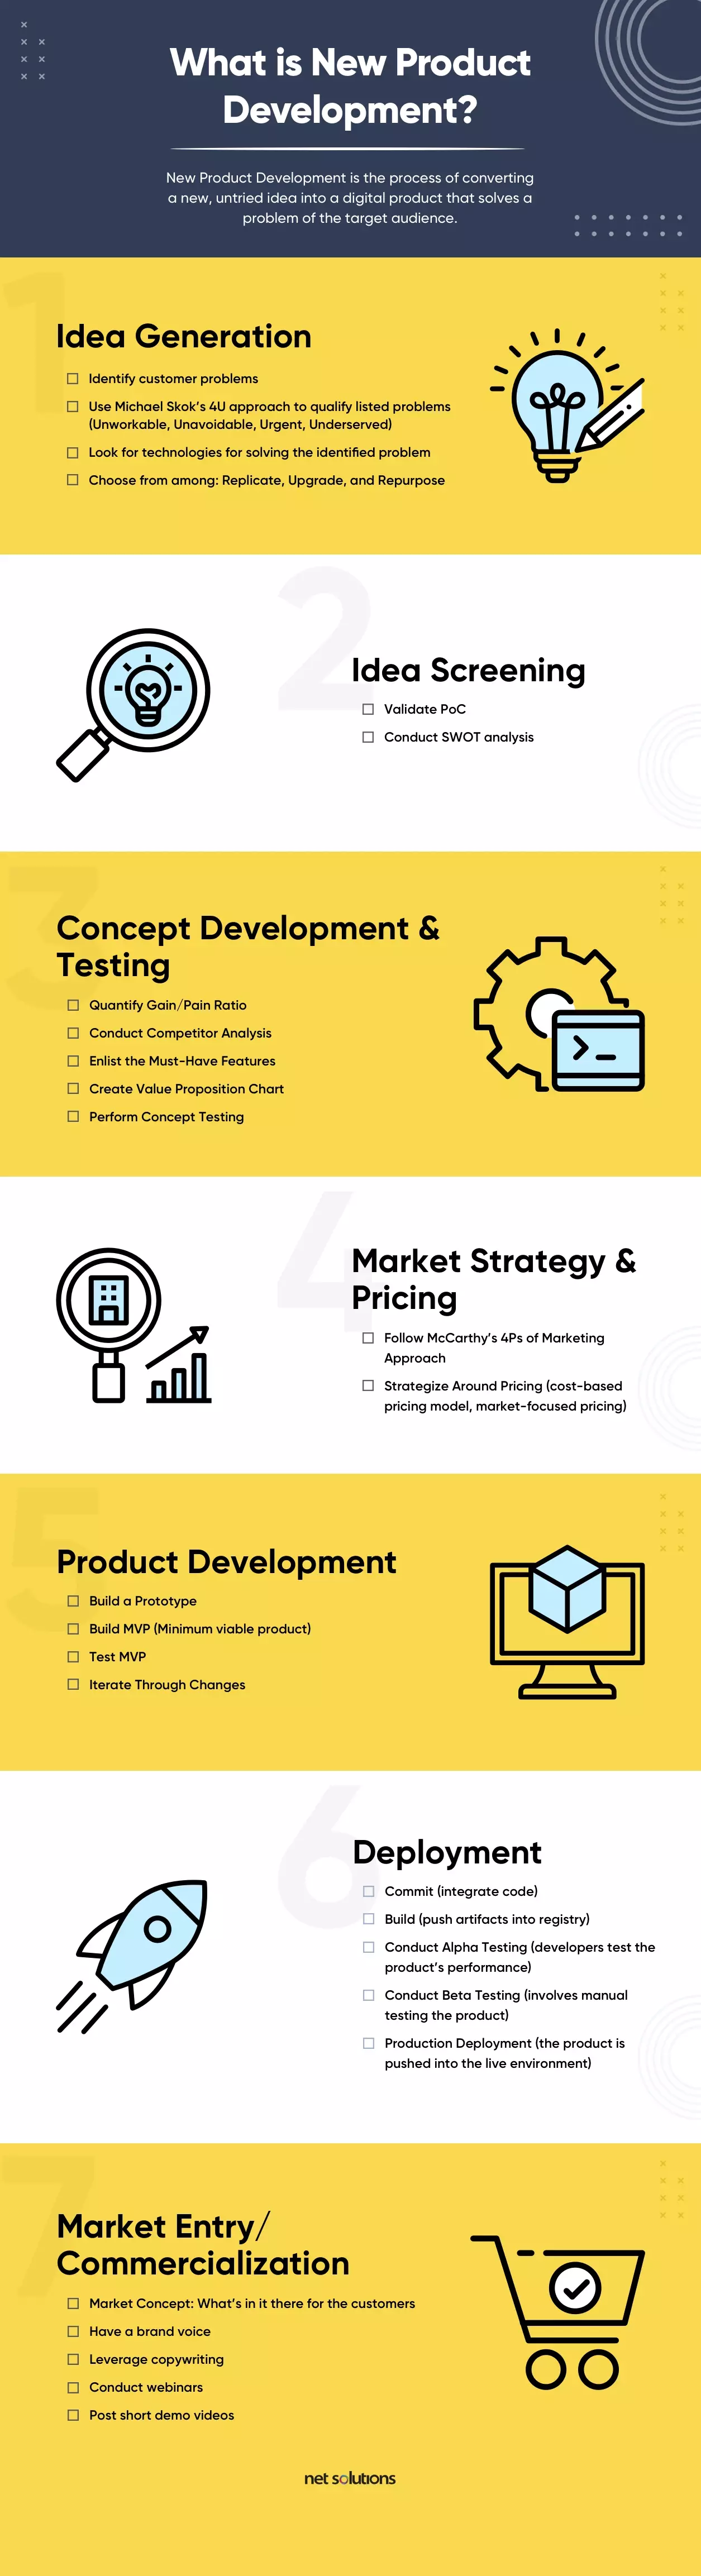 How to Use Qualitative and Quantitative Research in Product Development -  Relevant Insights